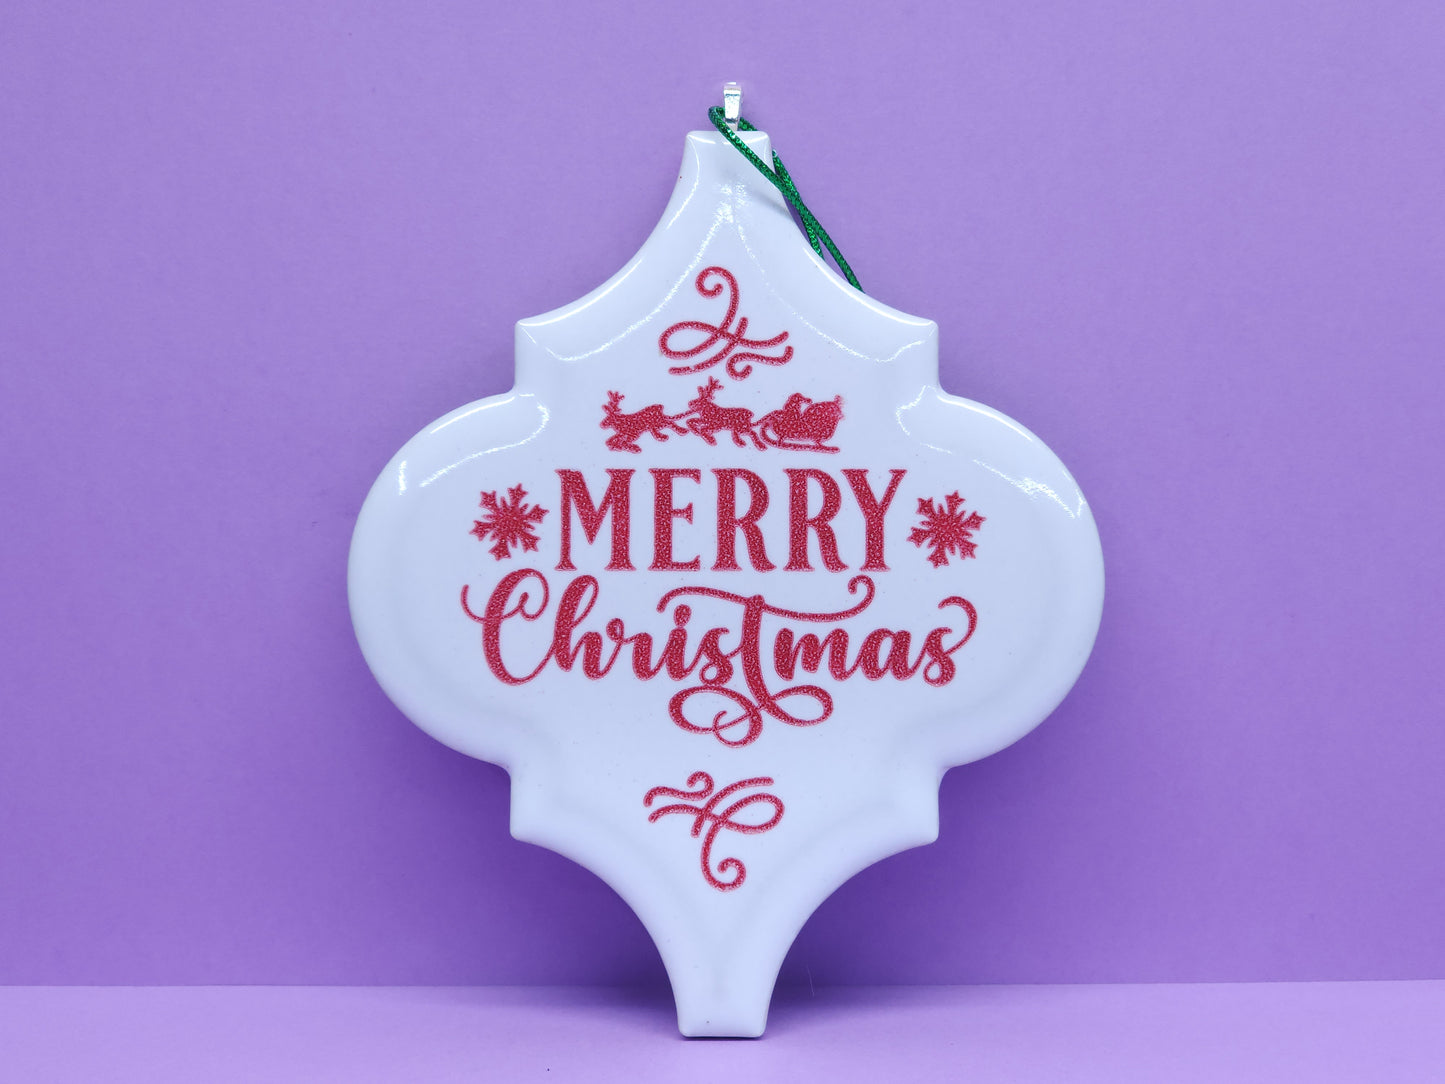 "Merry Christmas" Ink-Filled Arabesque Ornament